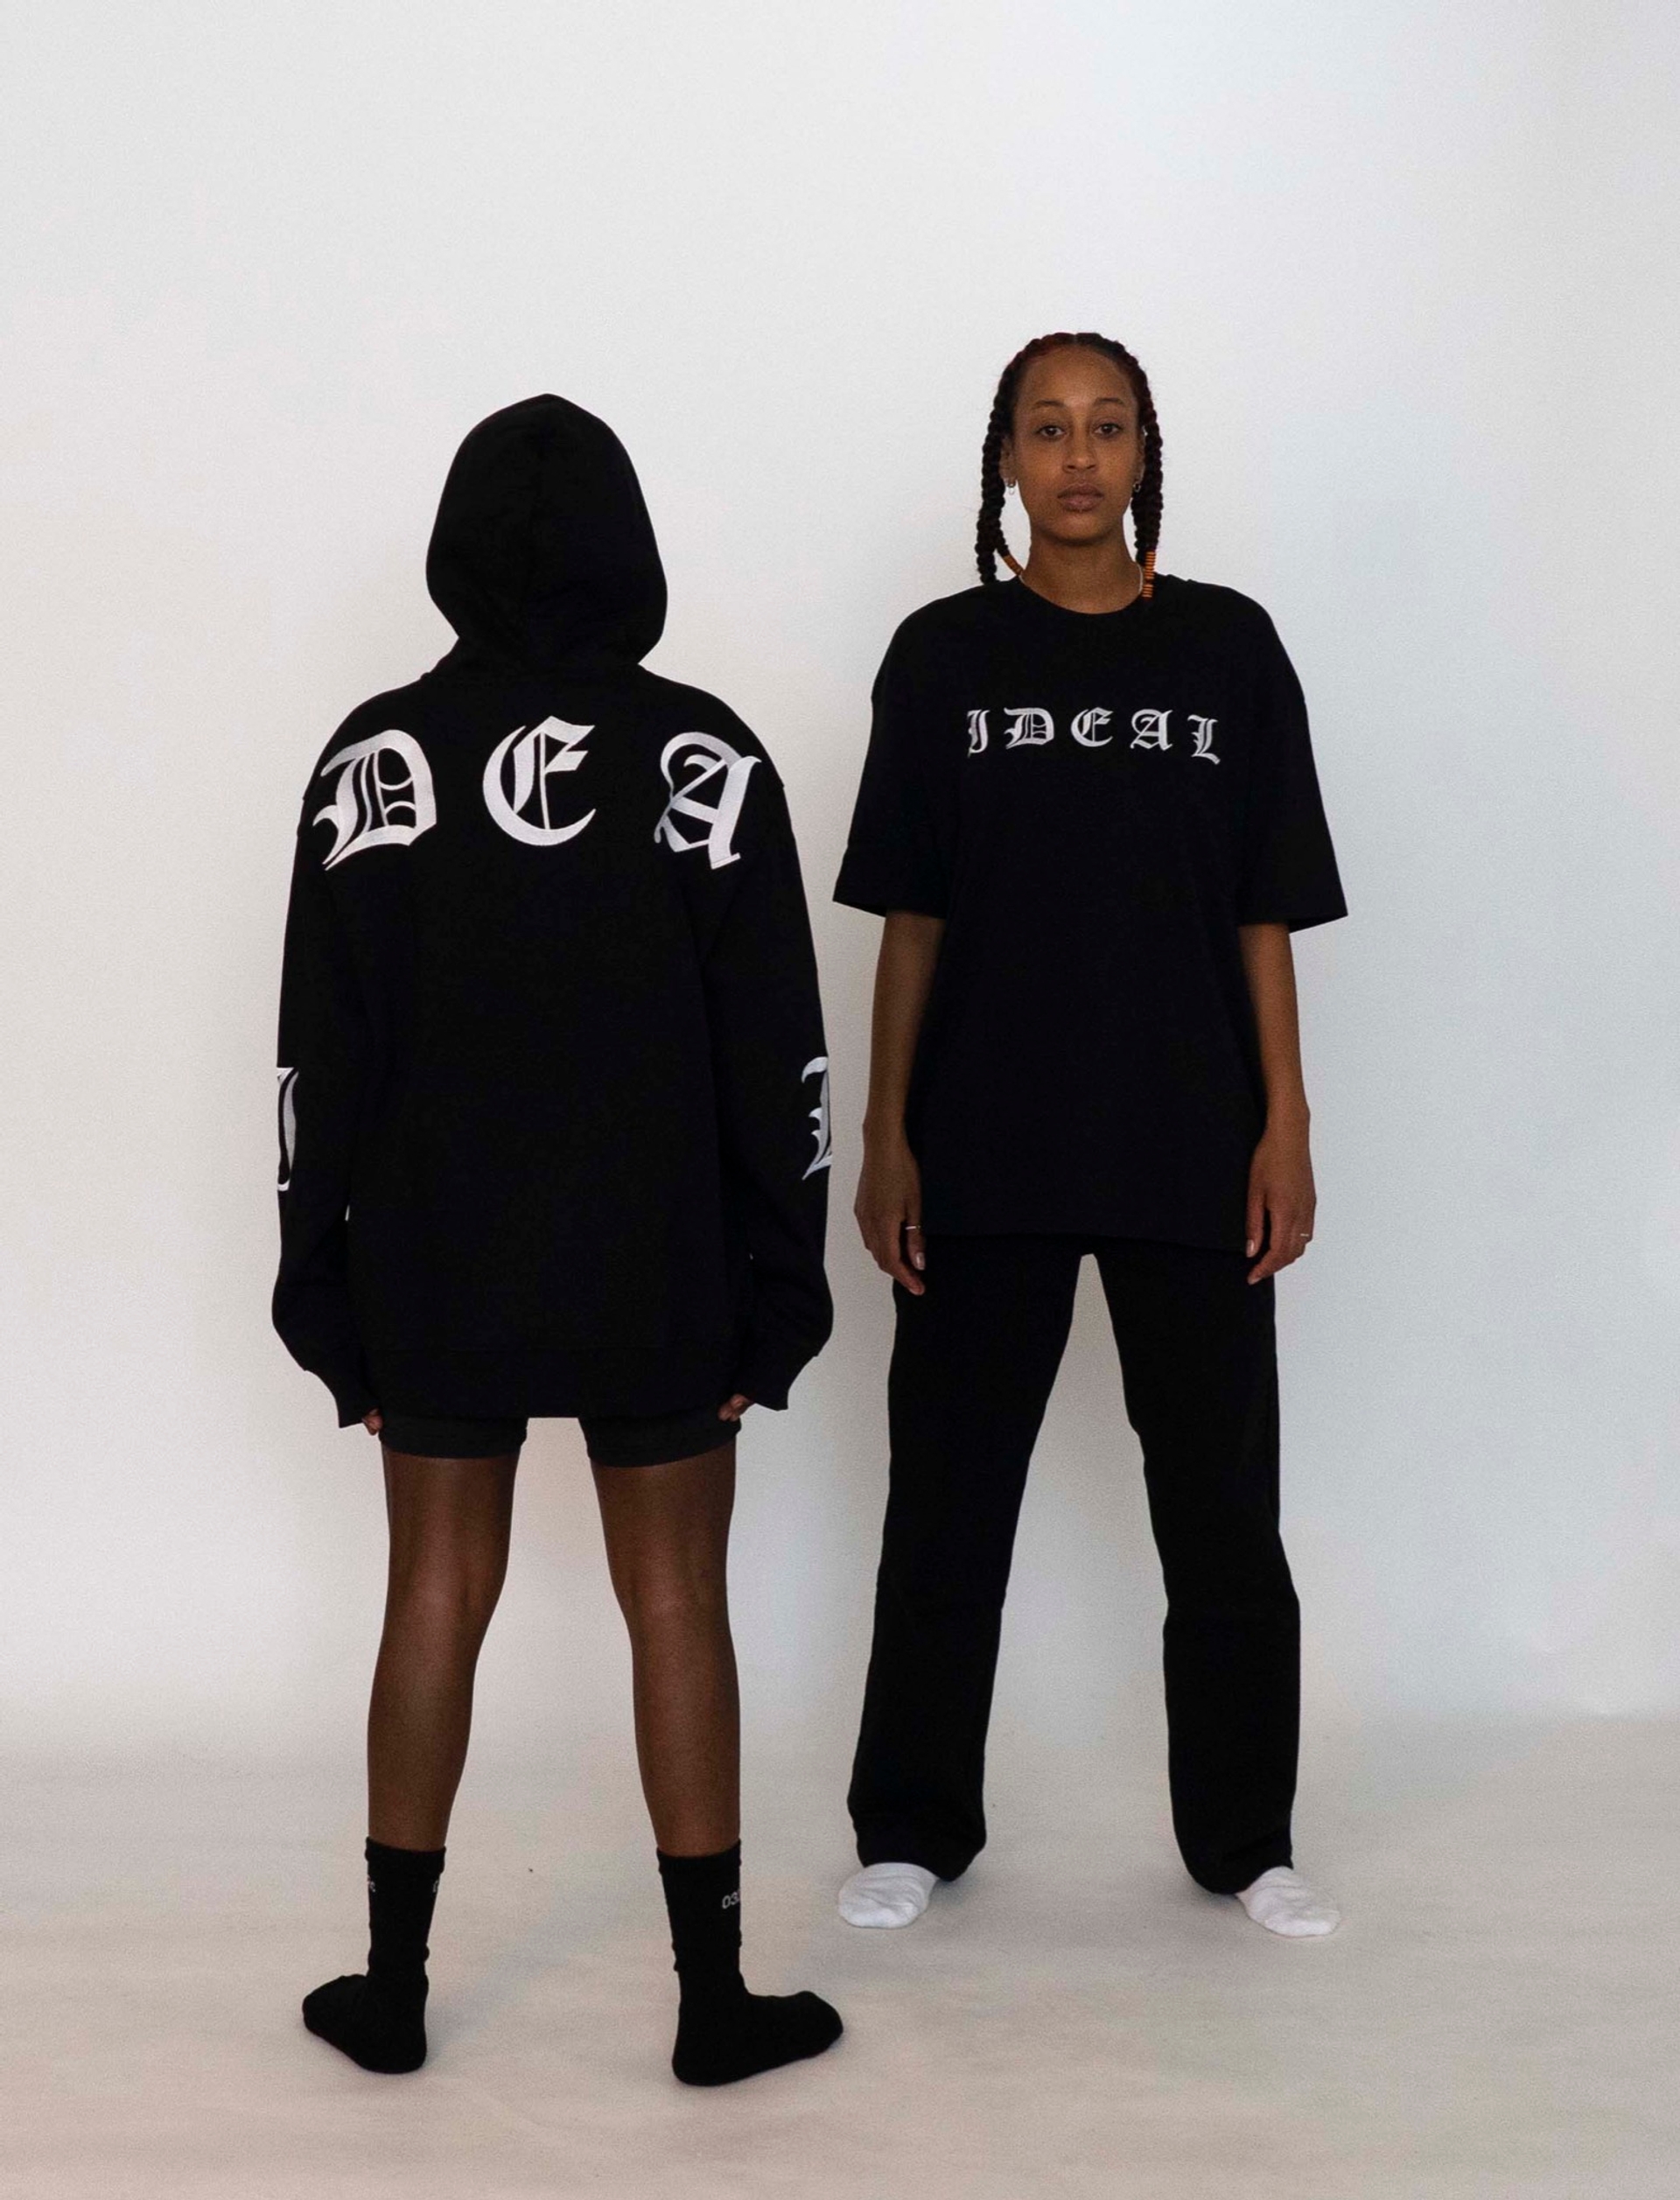 Mariama wears the 032c LoveSexDreams "Team Société"/"IDEAL" hoodie and neoprene shorts in black. Libell wears the "Ideal" t-shirt and straight leg trousers